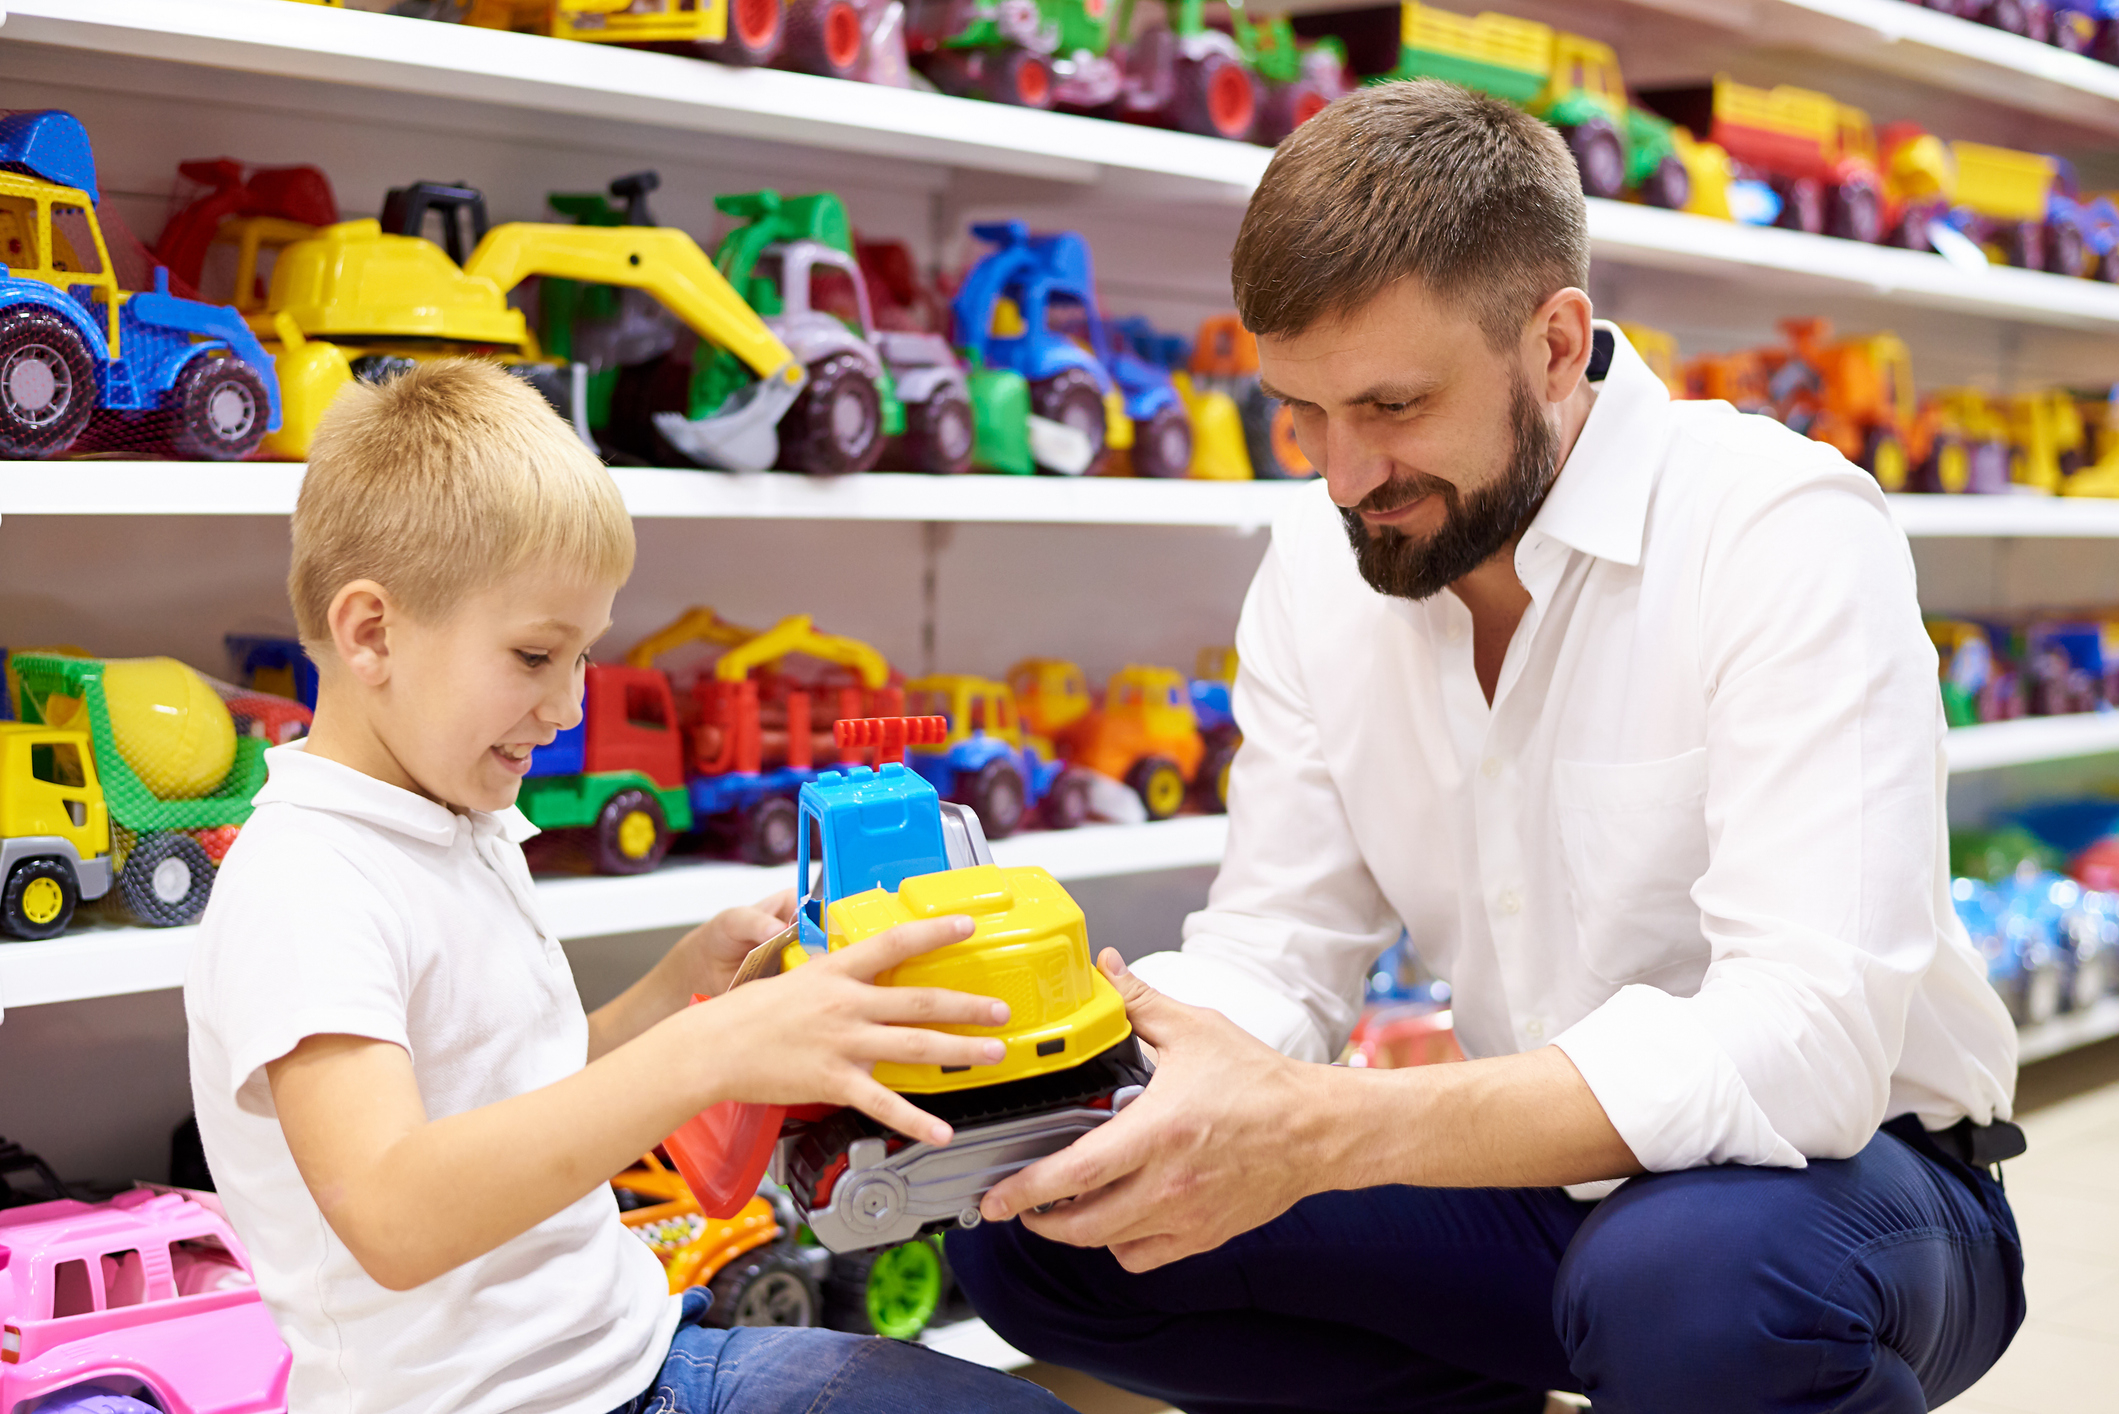 Adult and child smiling, examining a toy truck together in a toy store aisle